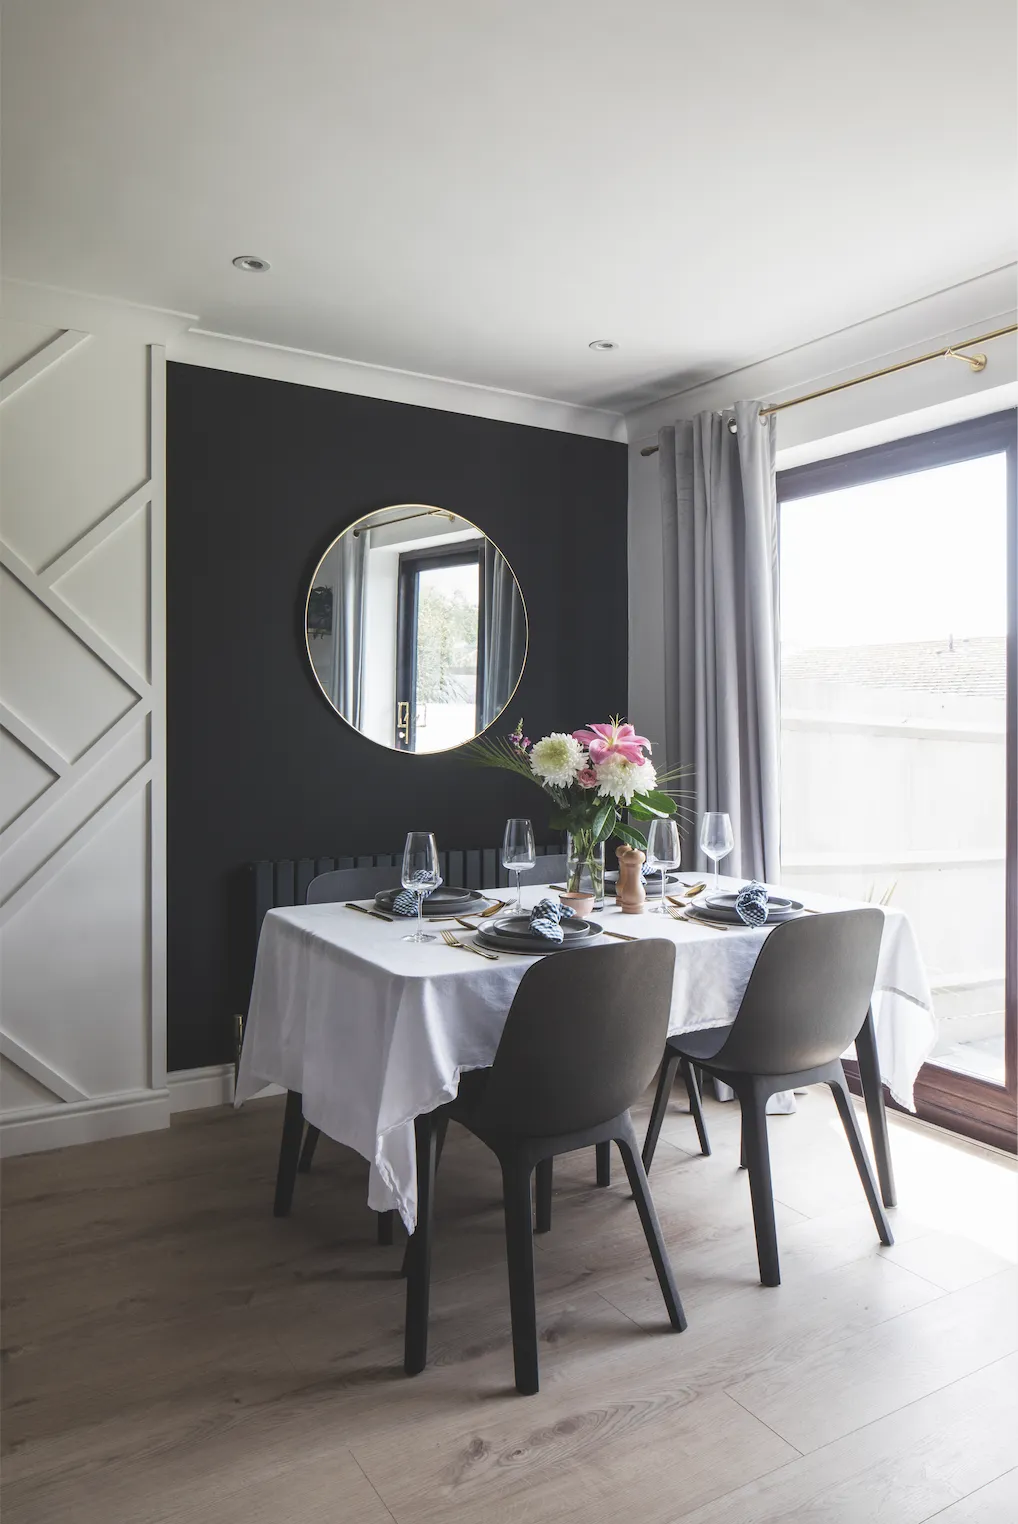 A white geometric panel between the dark walls zones the open-plan space, and Becca has brightened up the black wall behind the dining area with a round brass mirror. ‘It looks better in this alcove as it reflects the kitchen, rather than the TV,’ says Becca